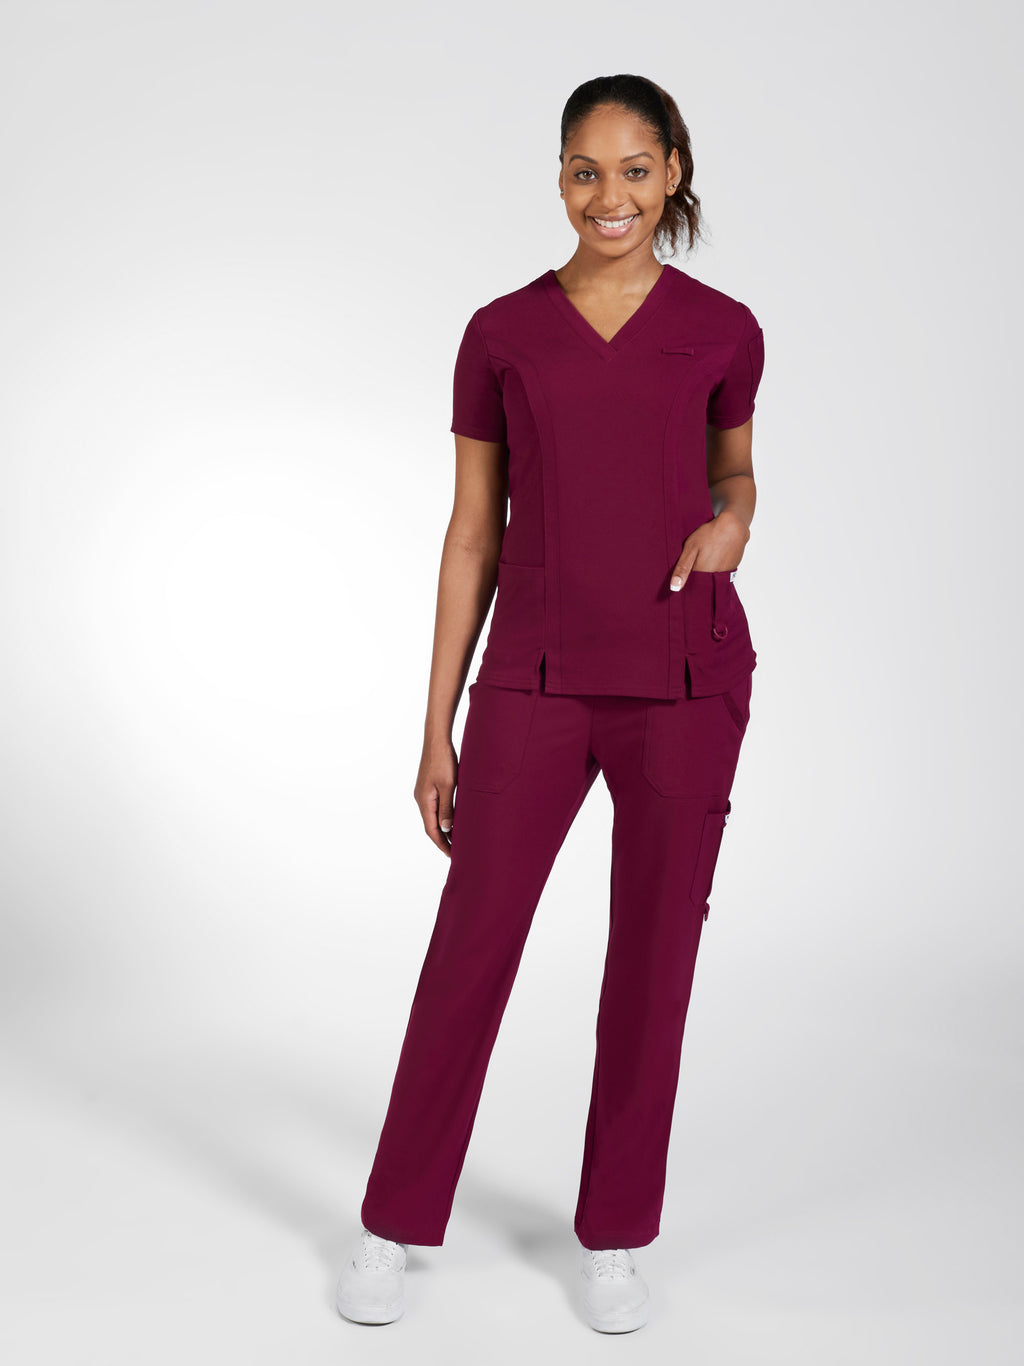 Product - The Cathy MOBB Scrub Top